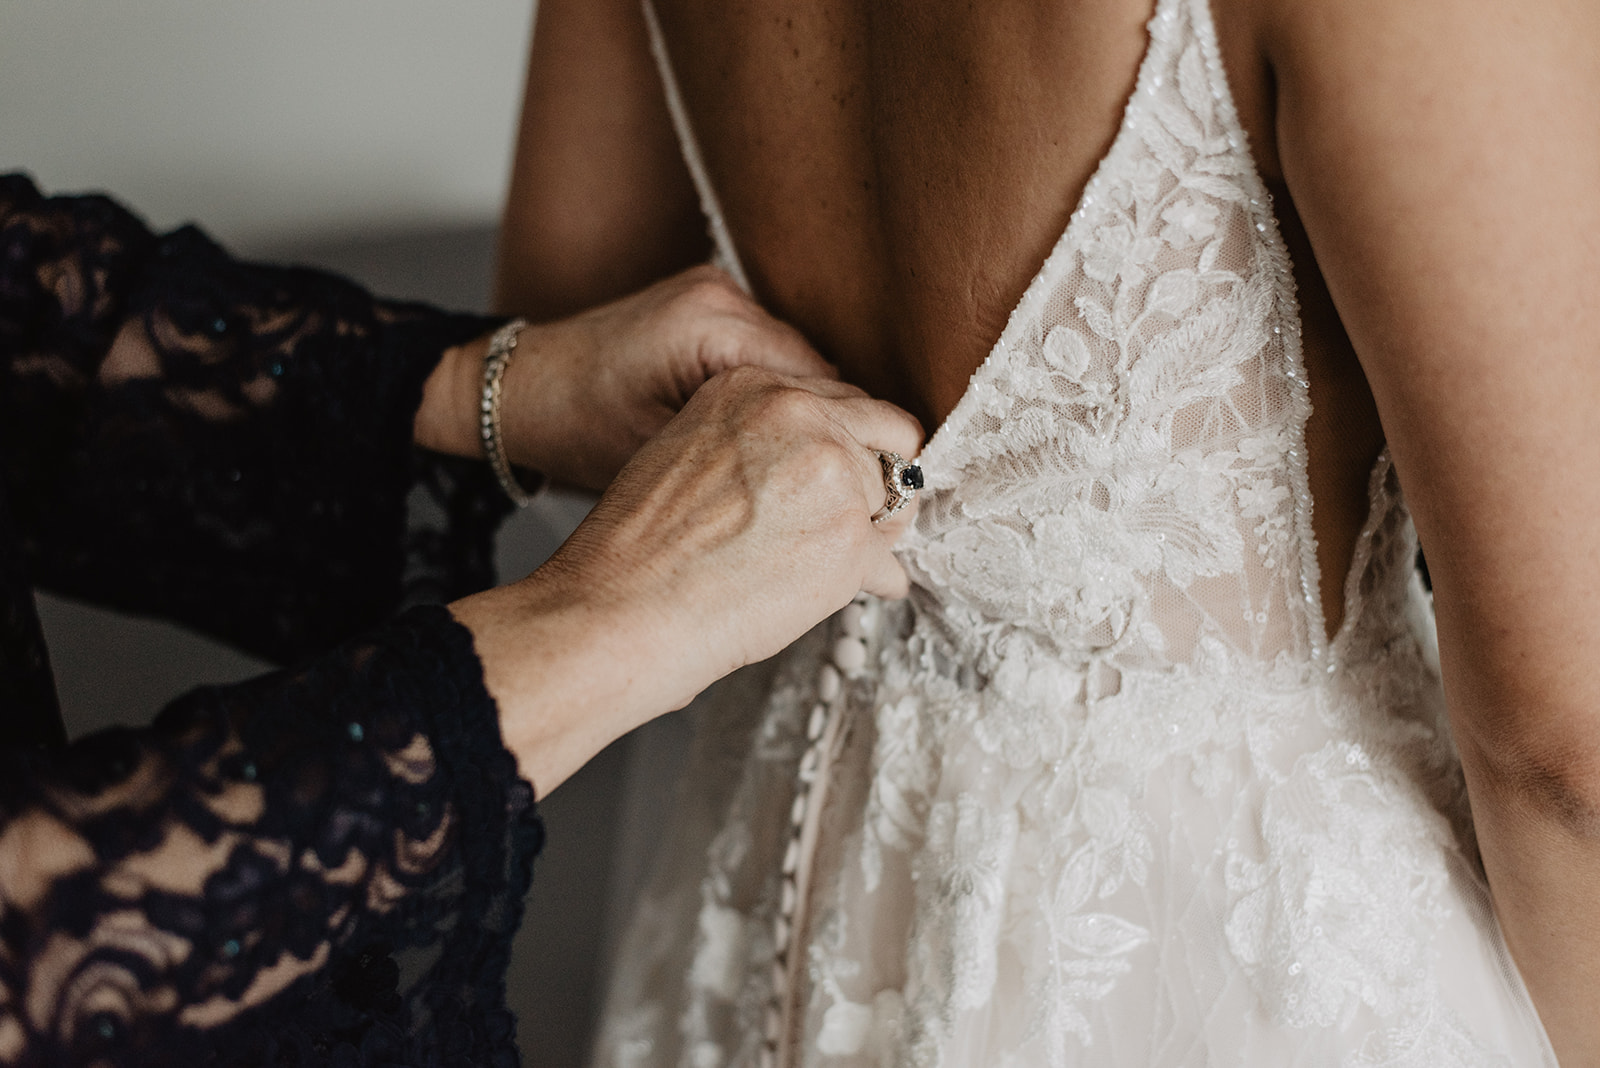 detail shot of brides mother buttoning up the back of her dress as the bride gets ready for her wedding ceremony